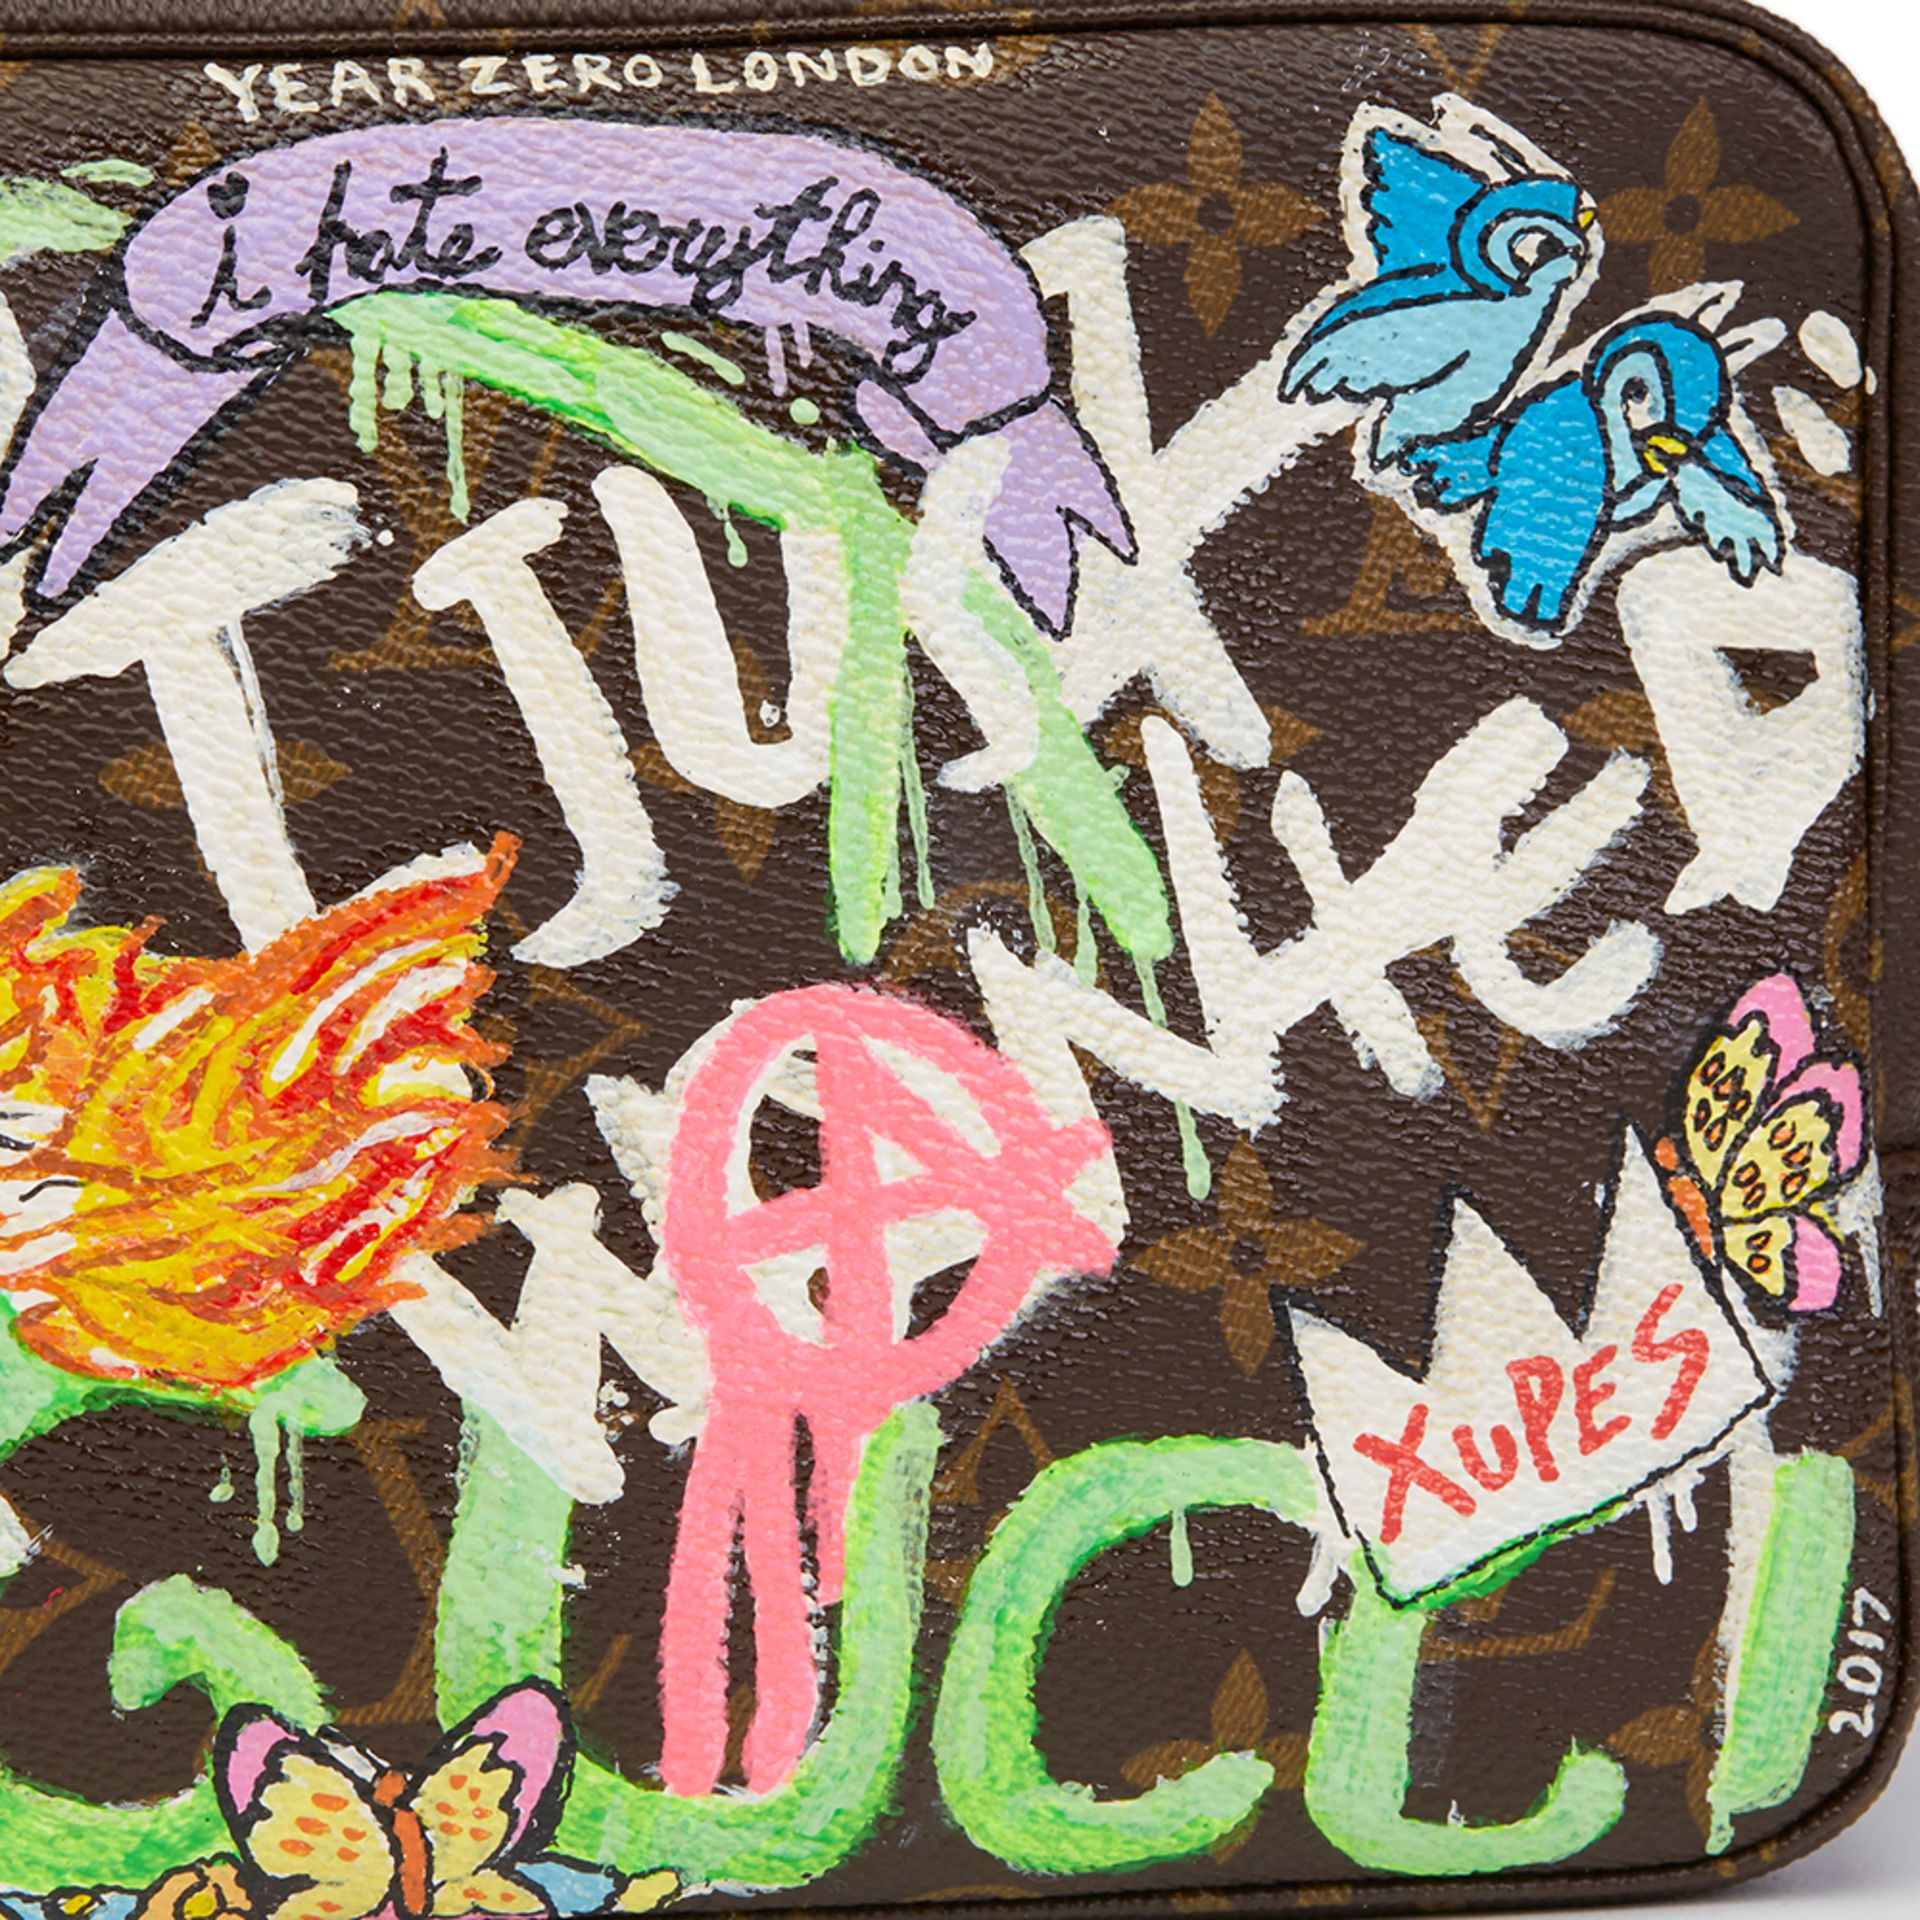 Hand-painted 'I just wanted Gucci' X Year Zero London Toiletry Pouch - Image 10 of 10